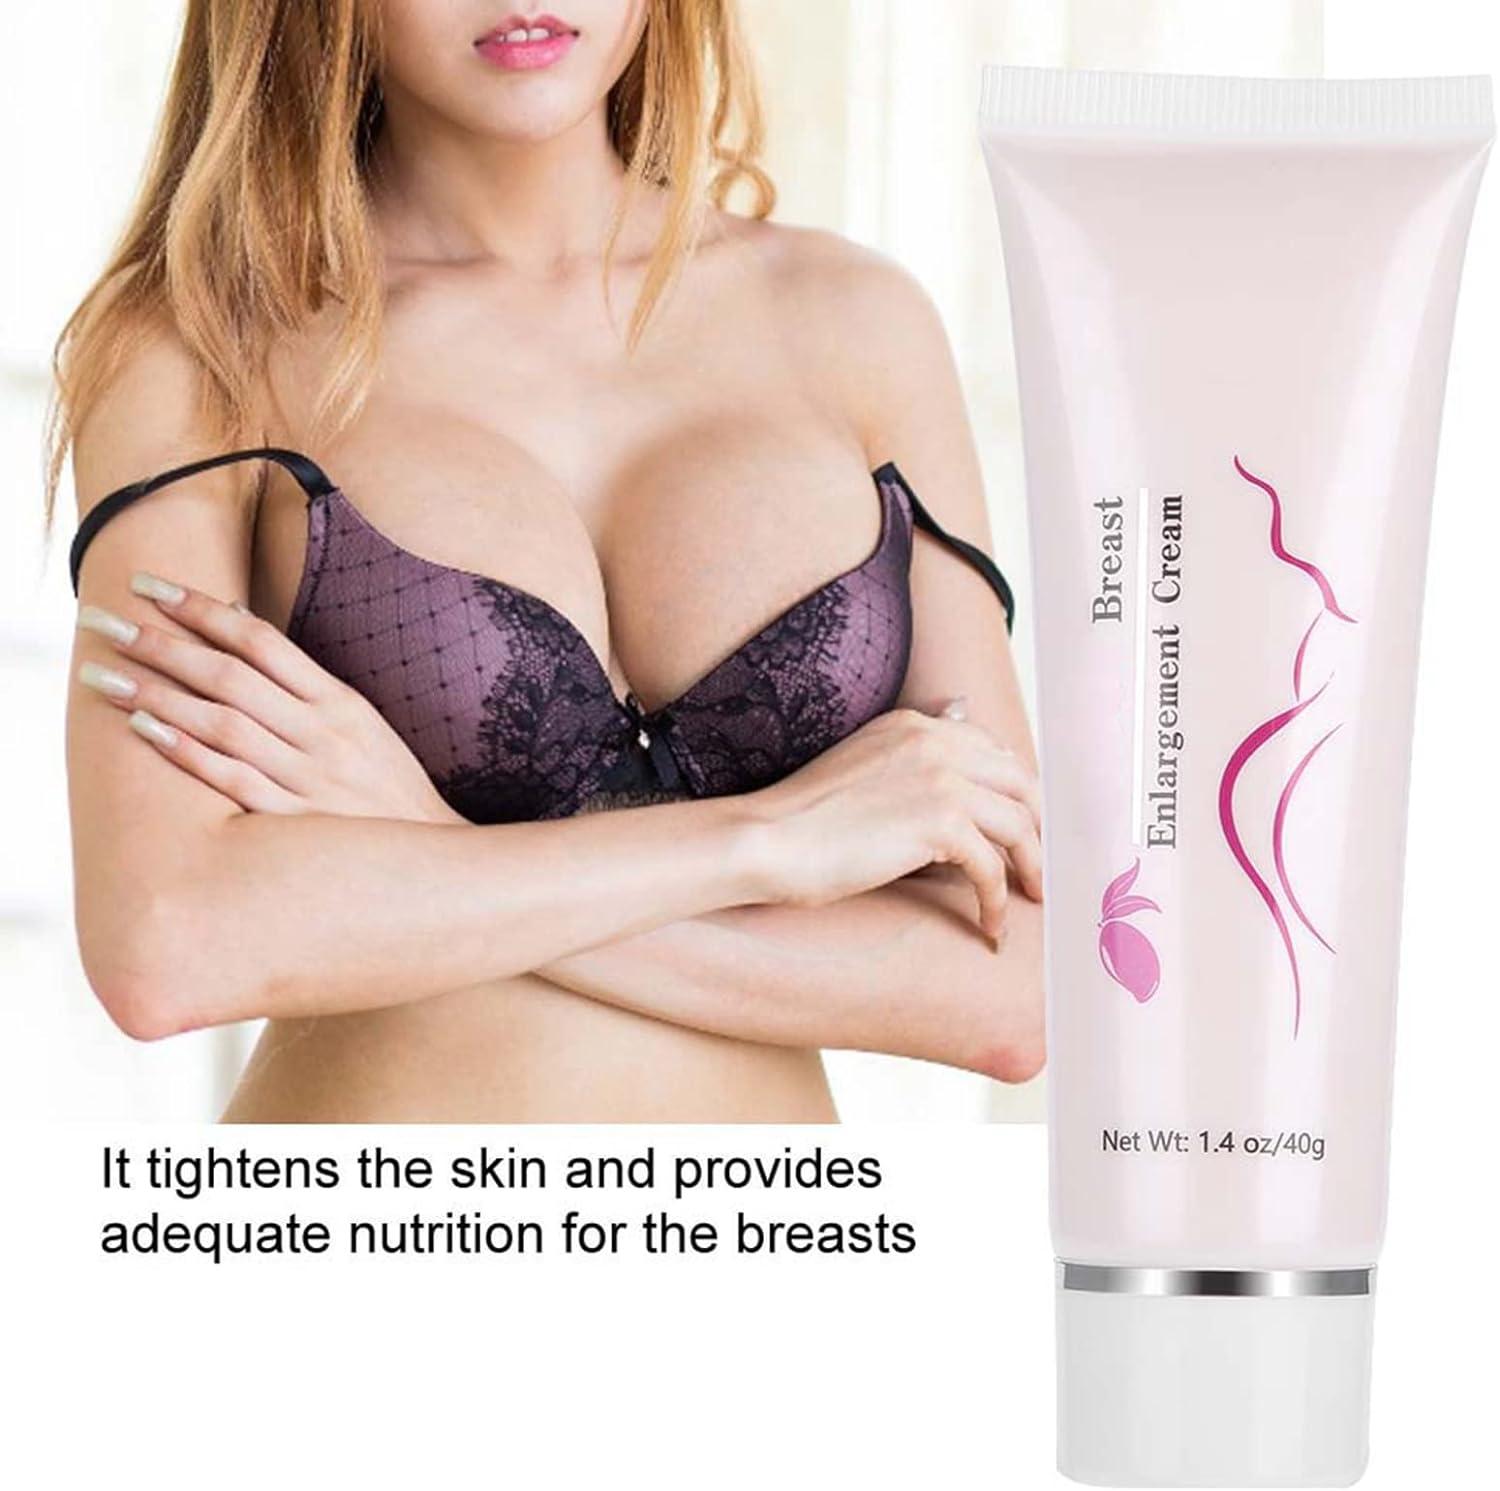 Breast Enhancement Cream 40g Chest Care Firming Lifting Breast Fast Growth  Enlargement Cream Big Bust Body to create Larger Fuller Firmer and Bigger  Boobs